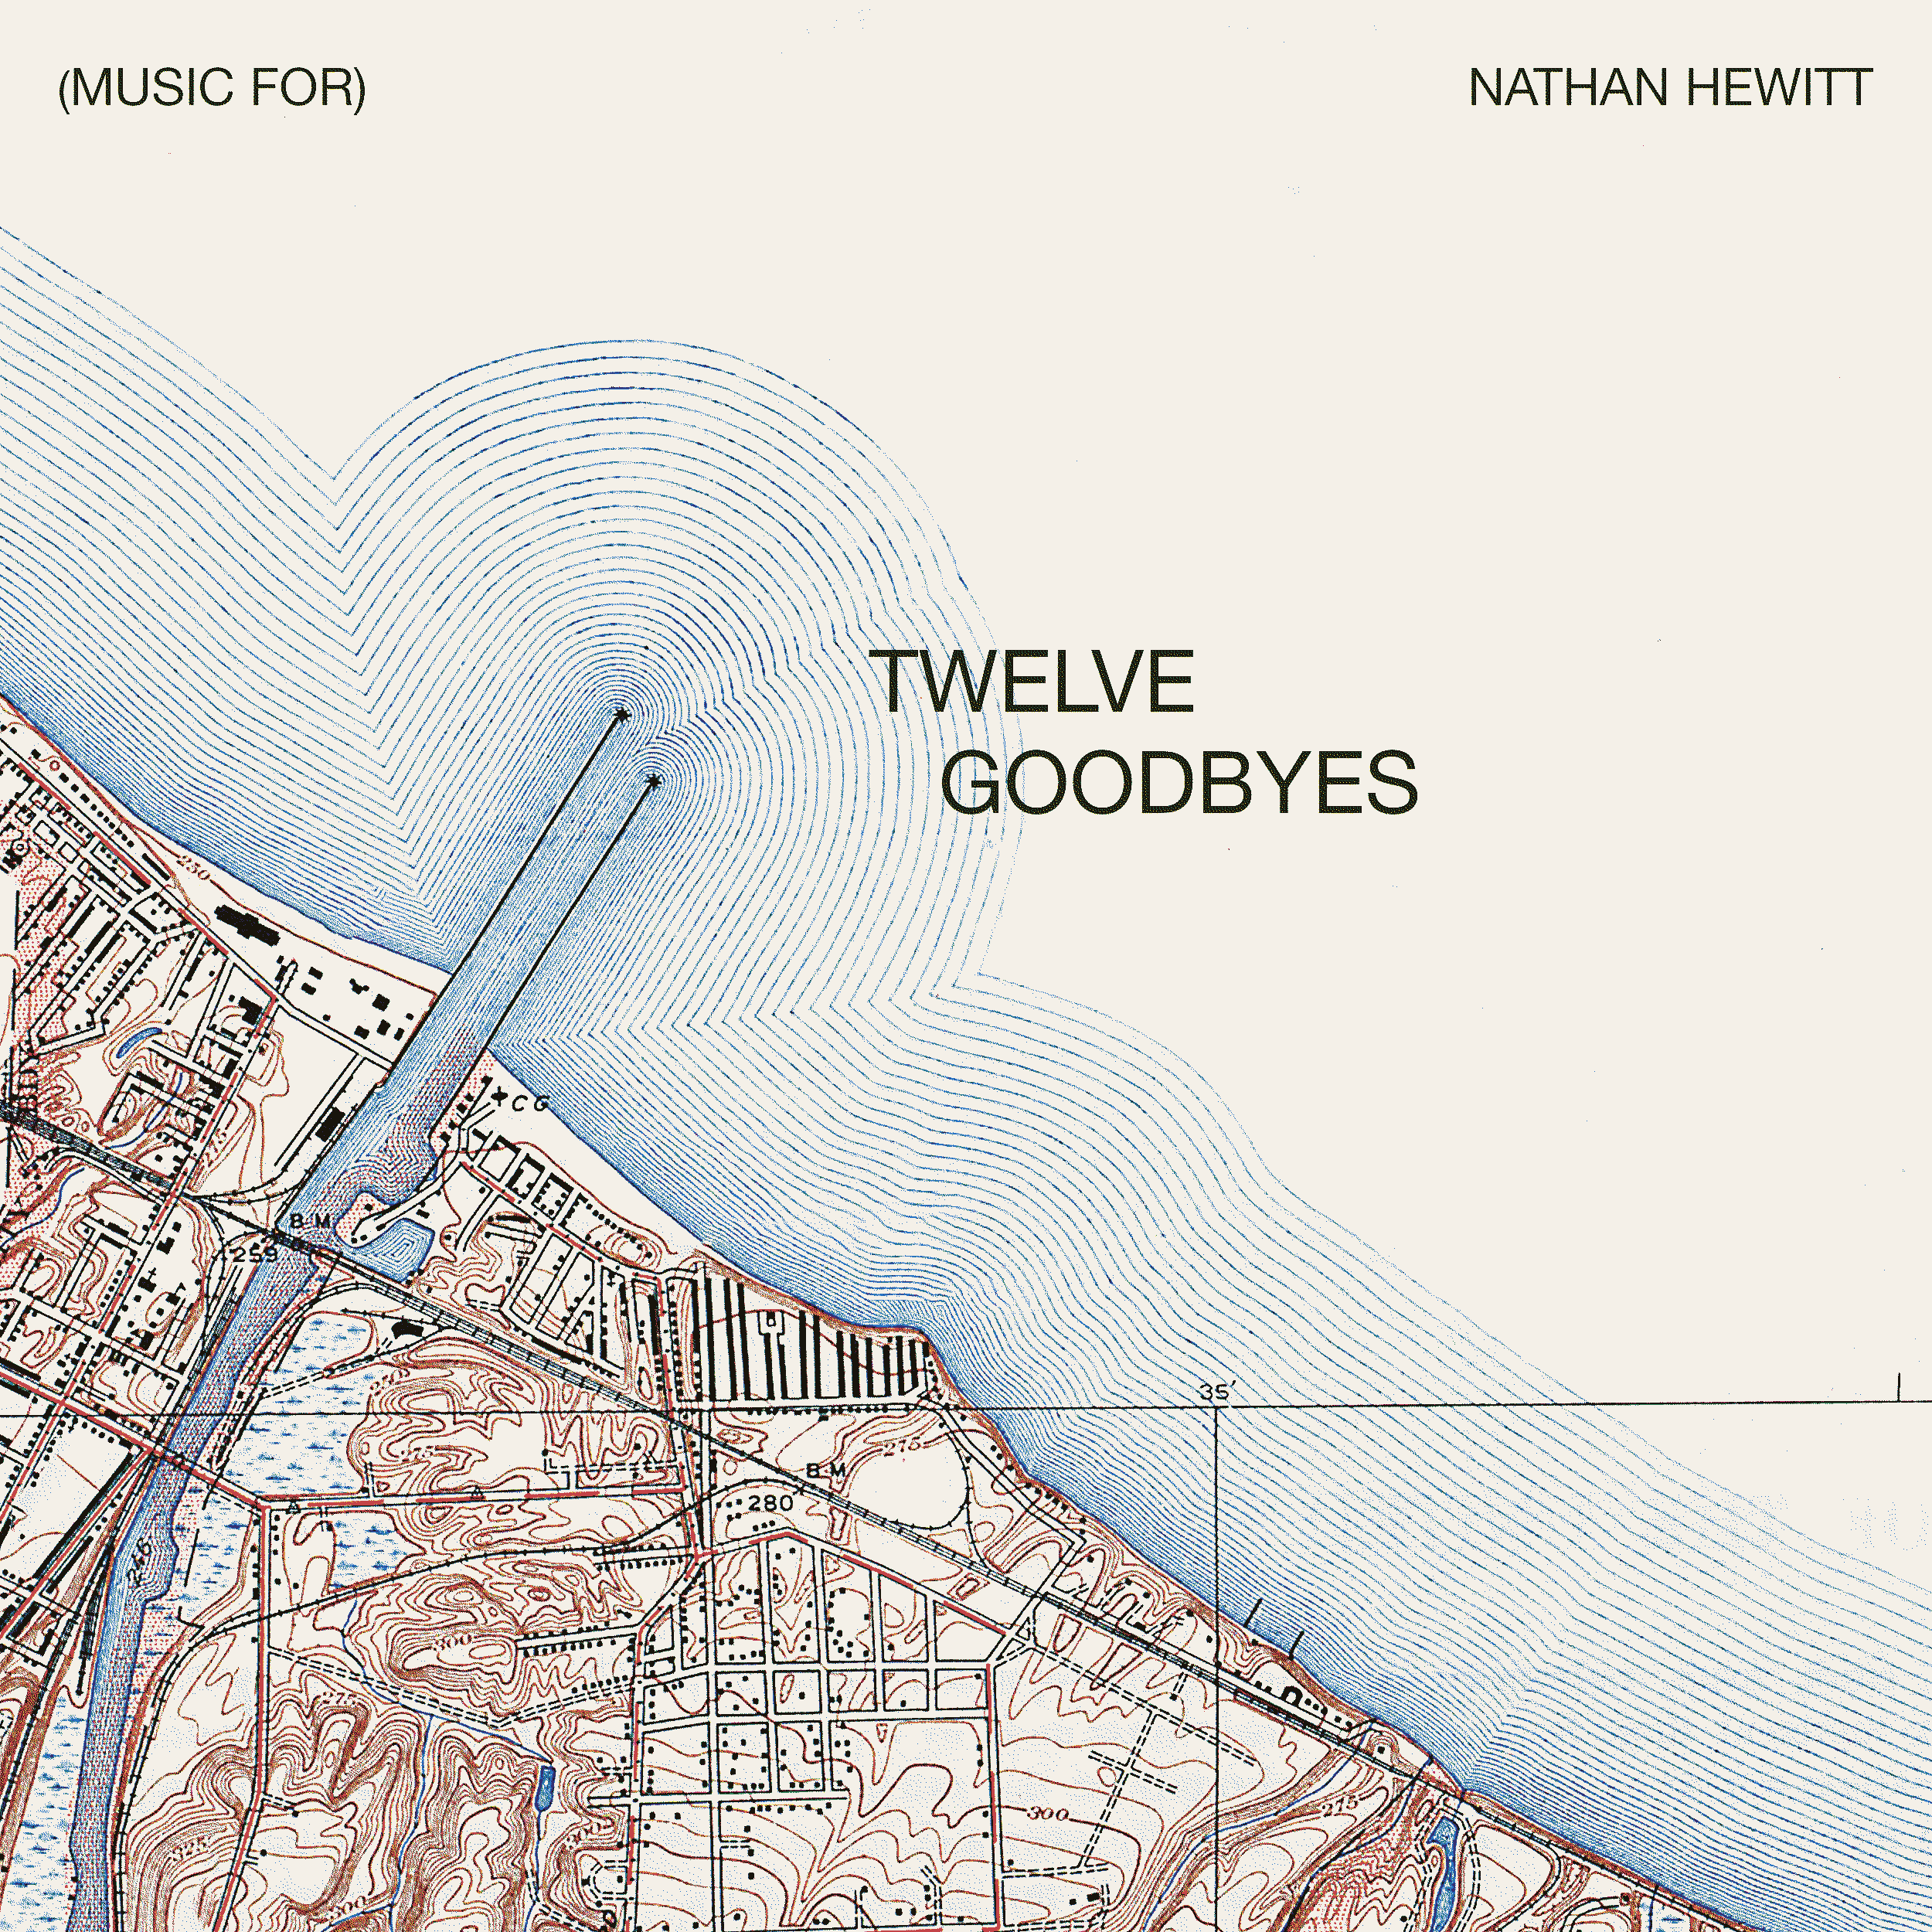 The album cover, a map with two lines sticking out into the ocean, bearing my name and that of the album.